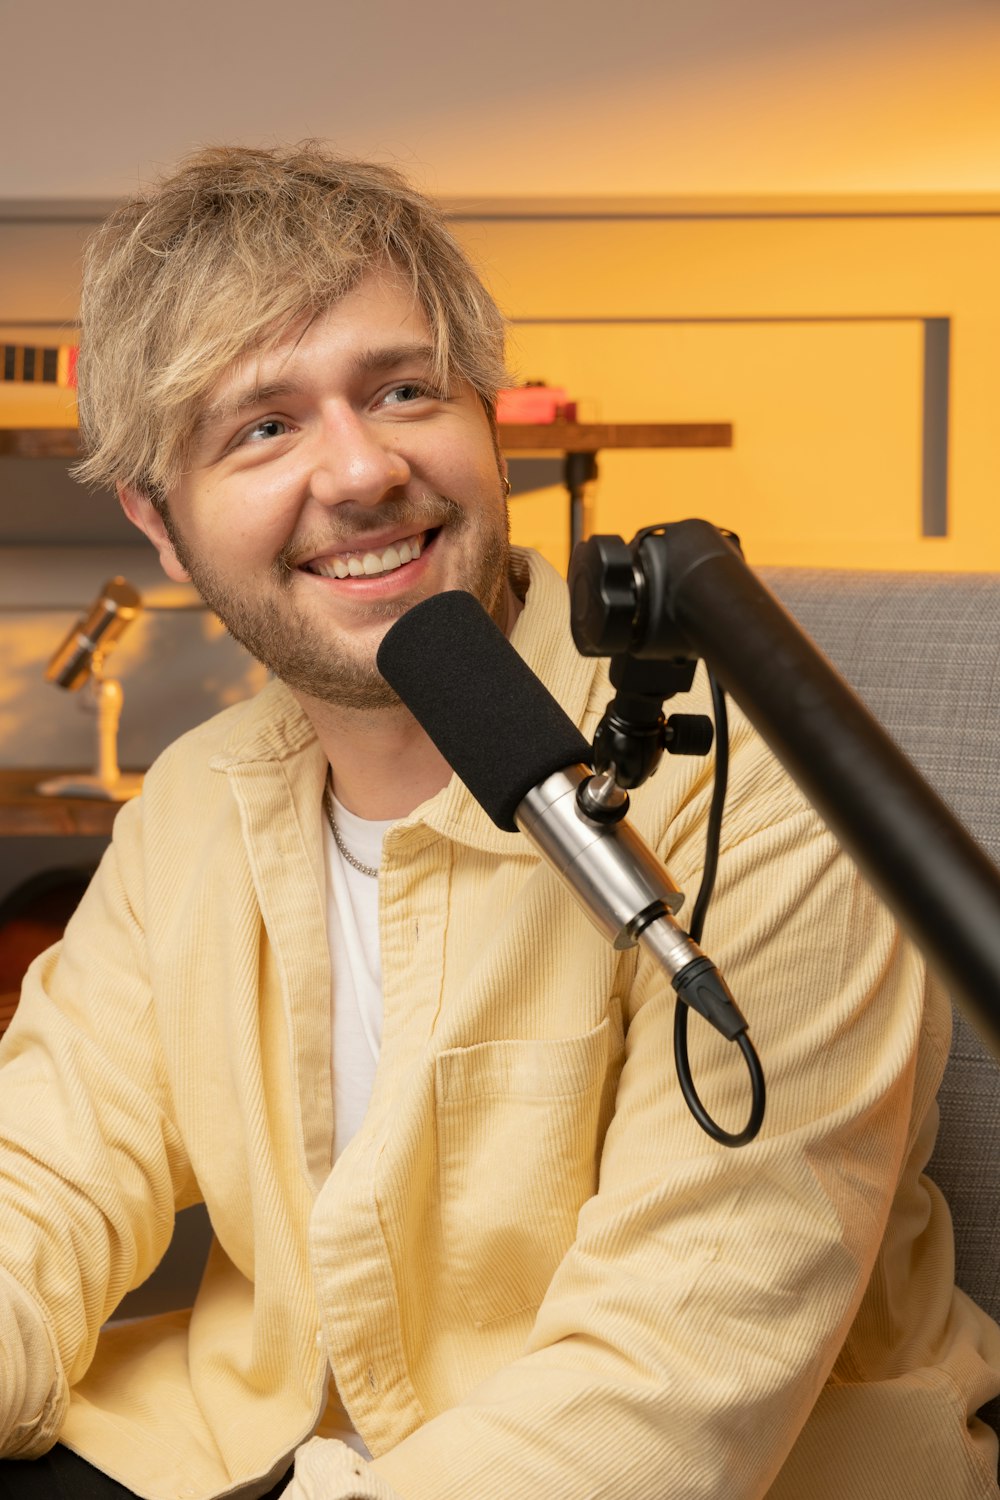 a person smiling with a microphone